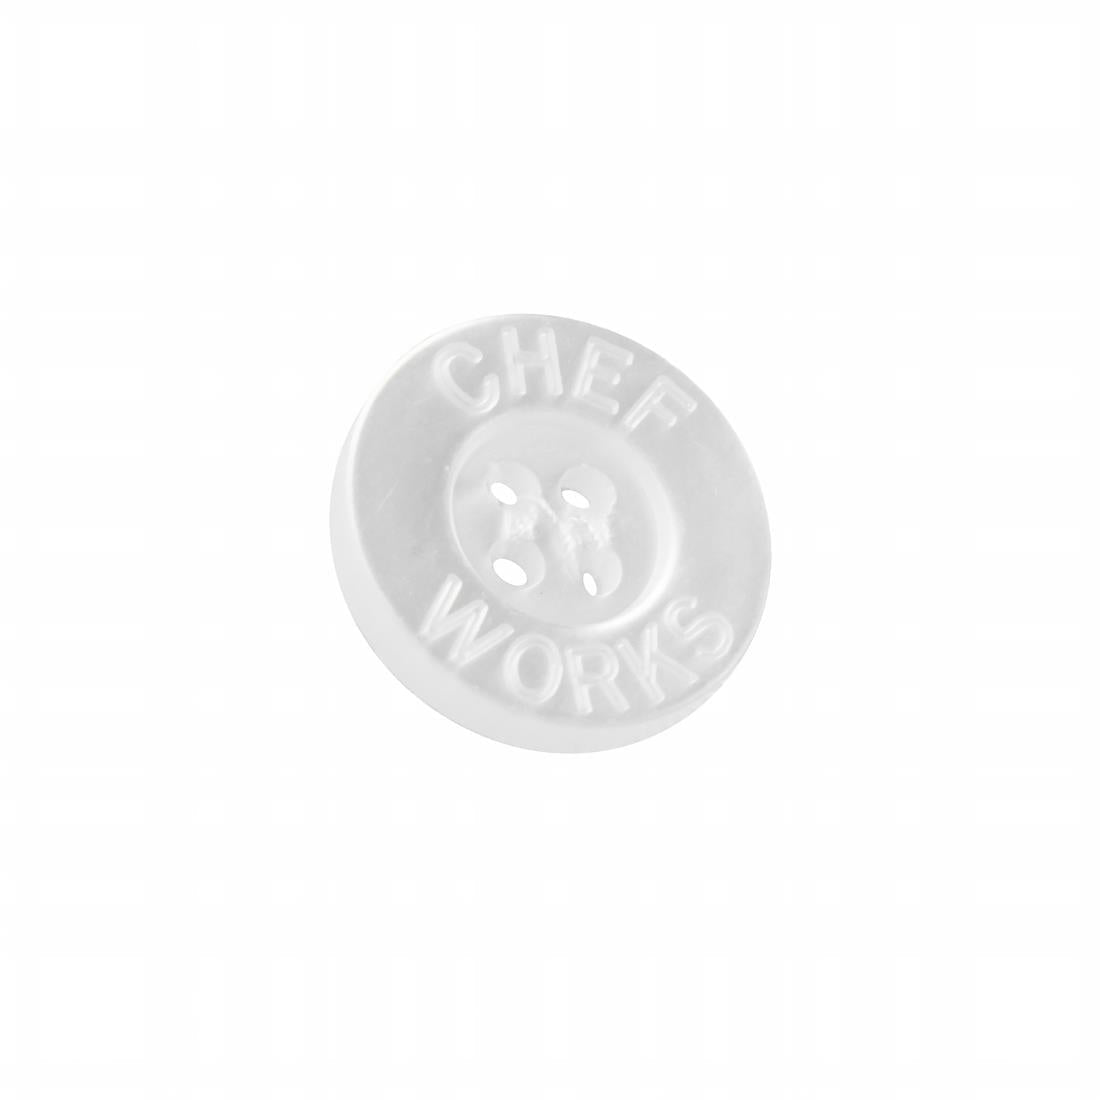 A371-6XL Chef Works Le Mans Chefs Jacket White 6XL JD Catering Equipment Solutions Ltd